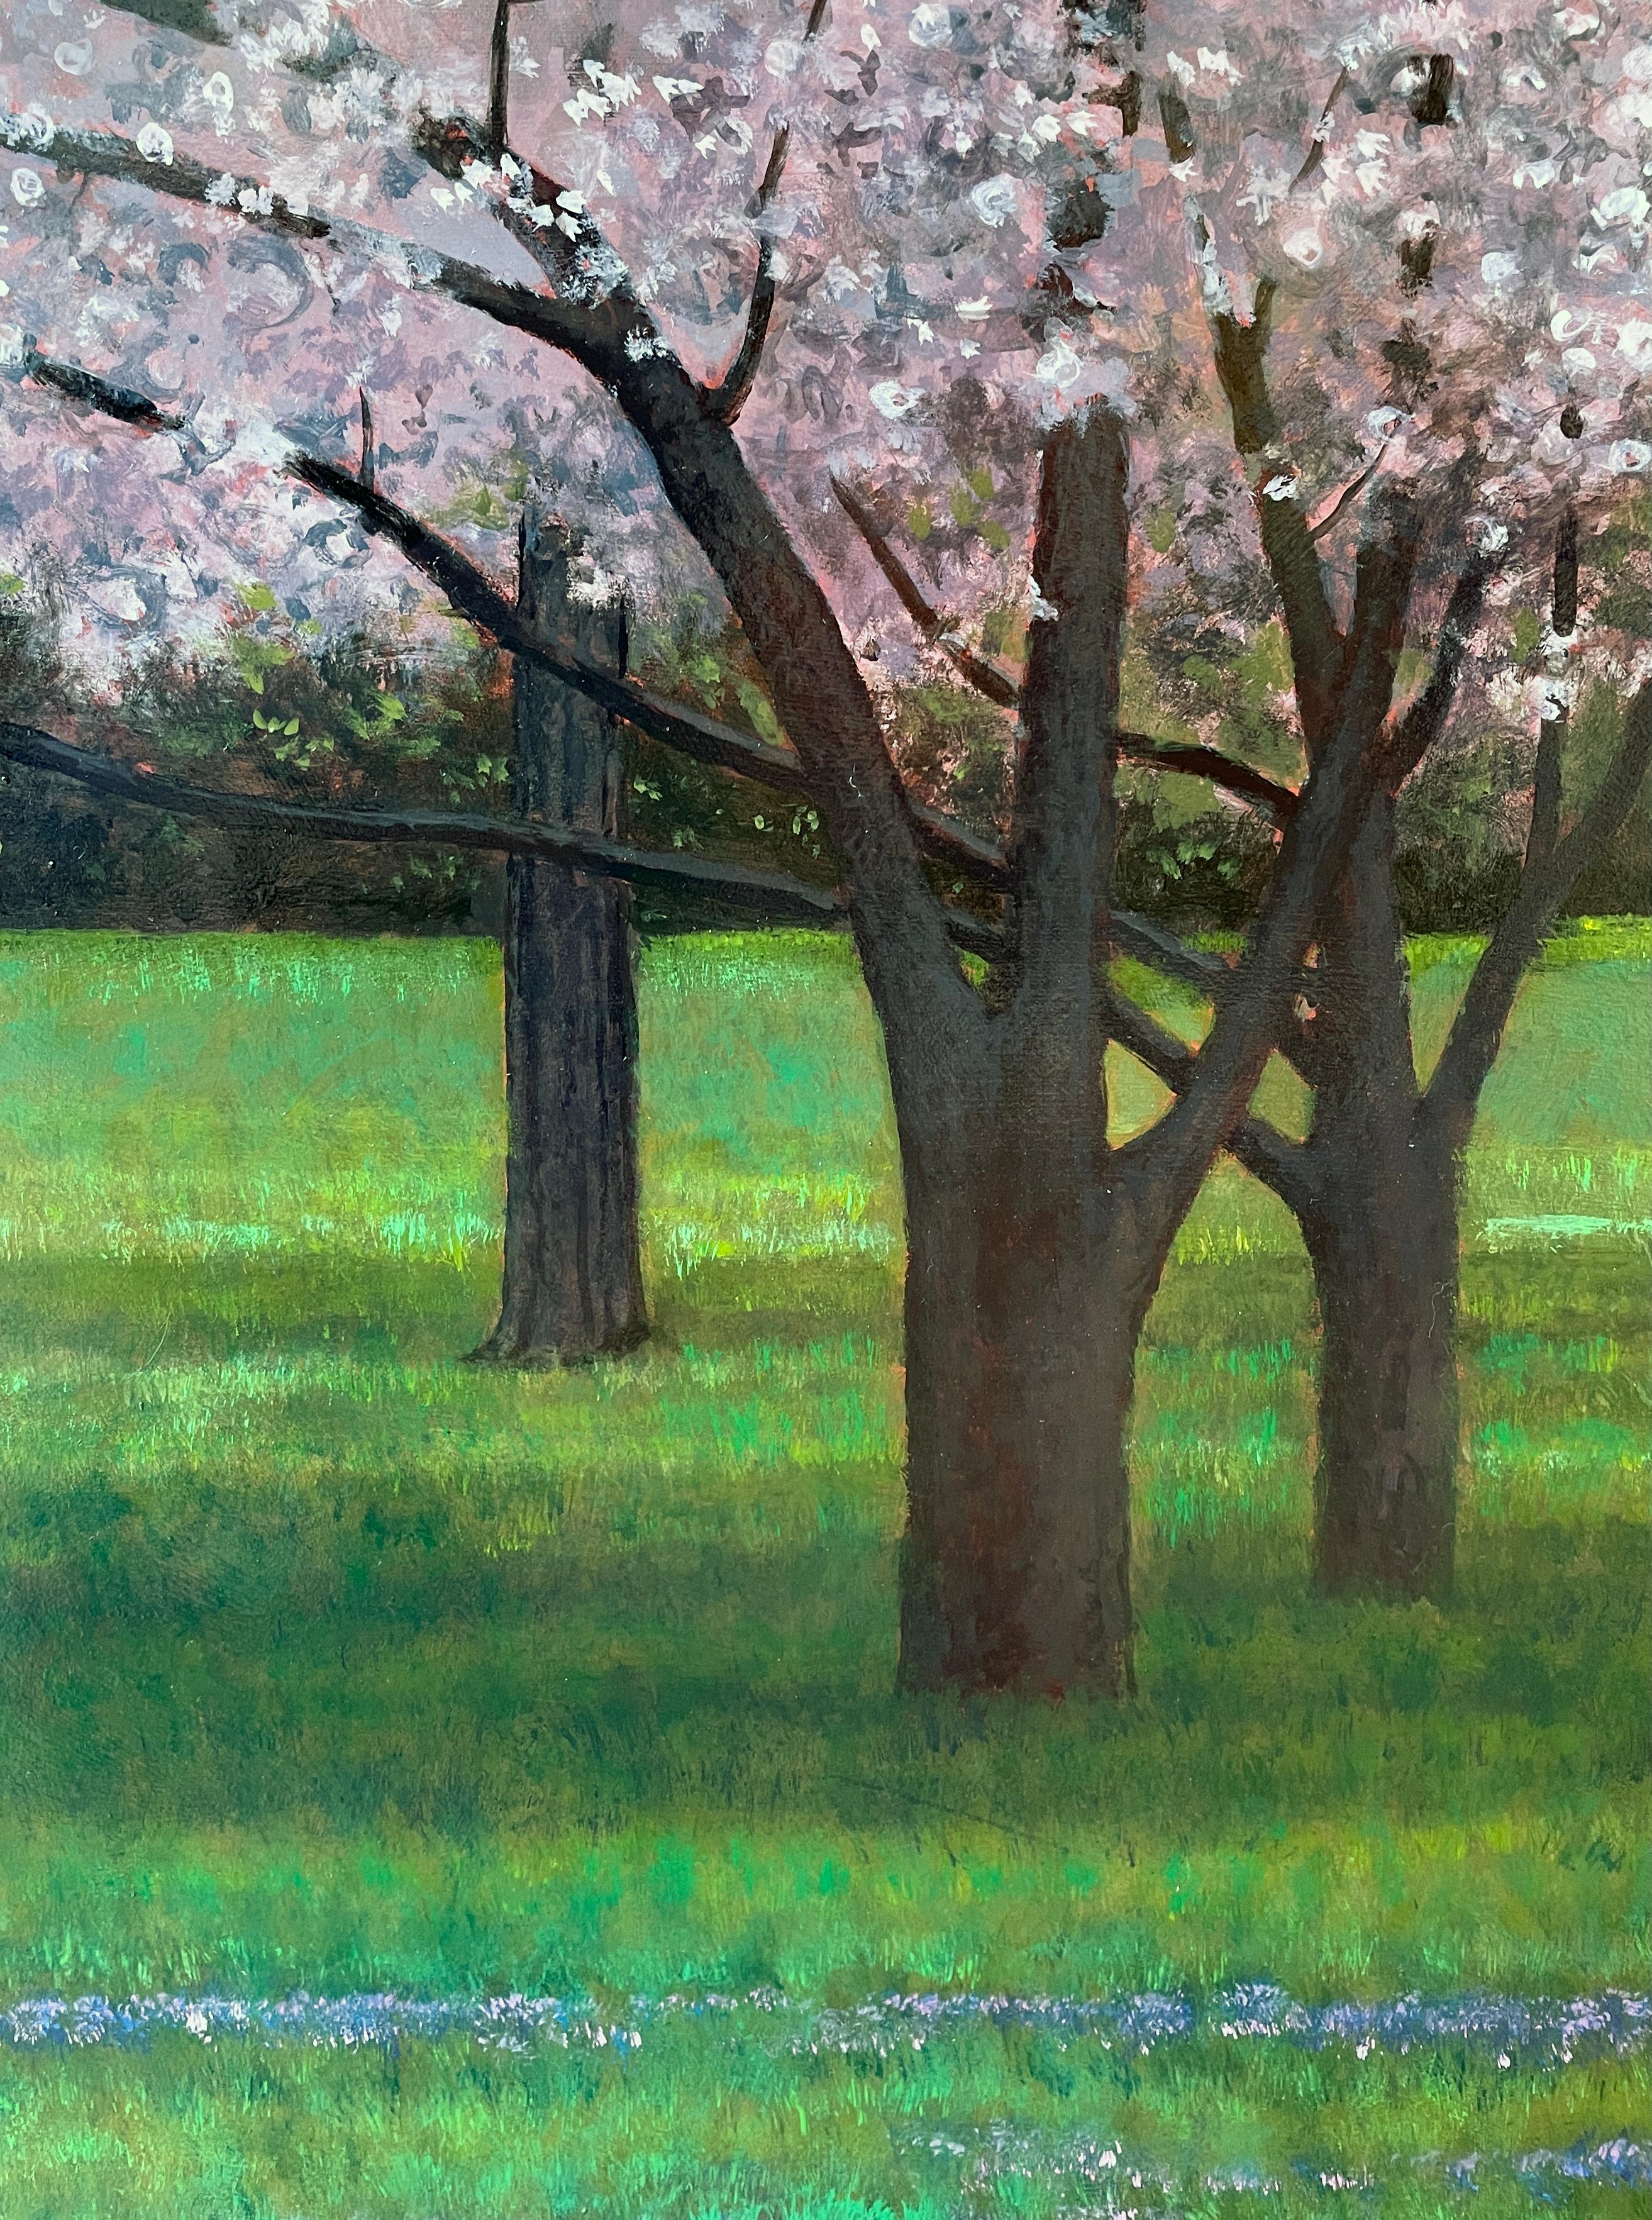 Crabapple - Spring Blooming Crabapple Tree in Green Grassy Clearing, Oil Paint - Black Landscape Painting by Jeff Aeling